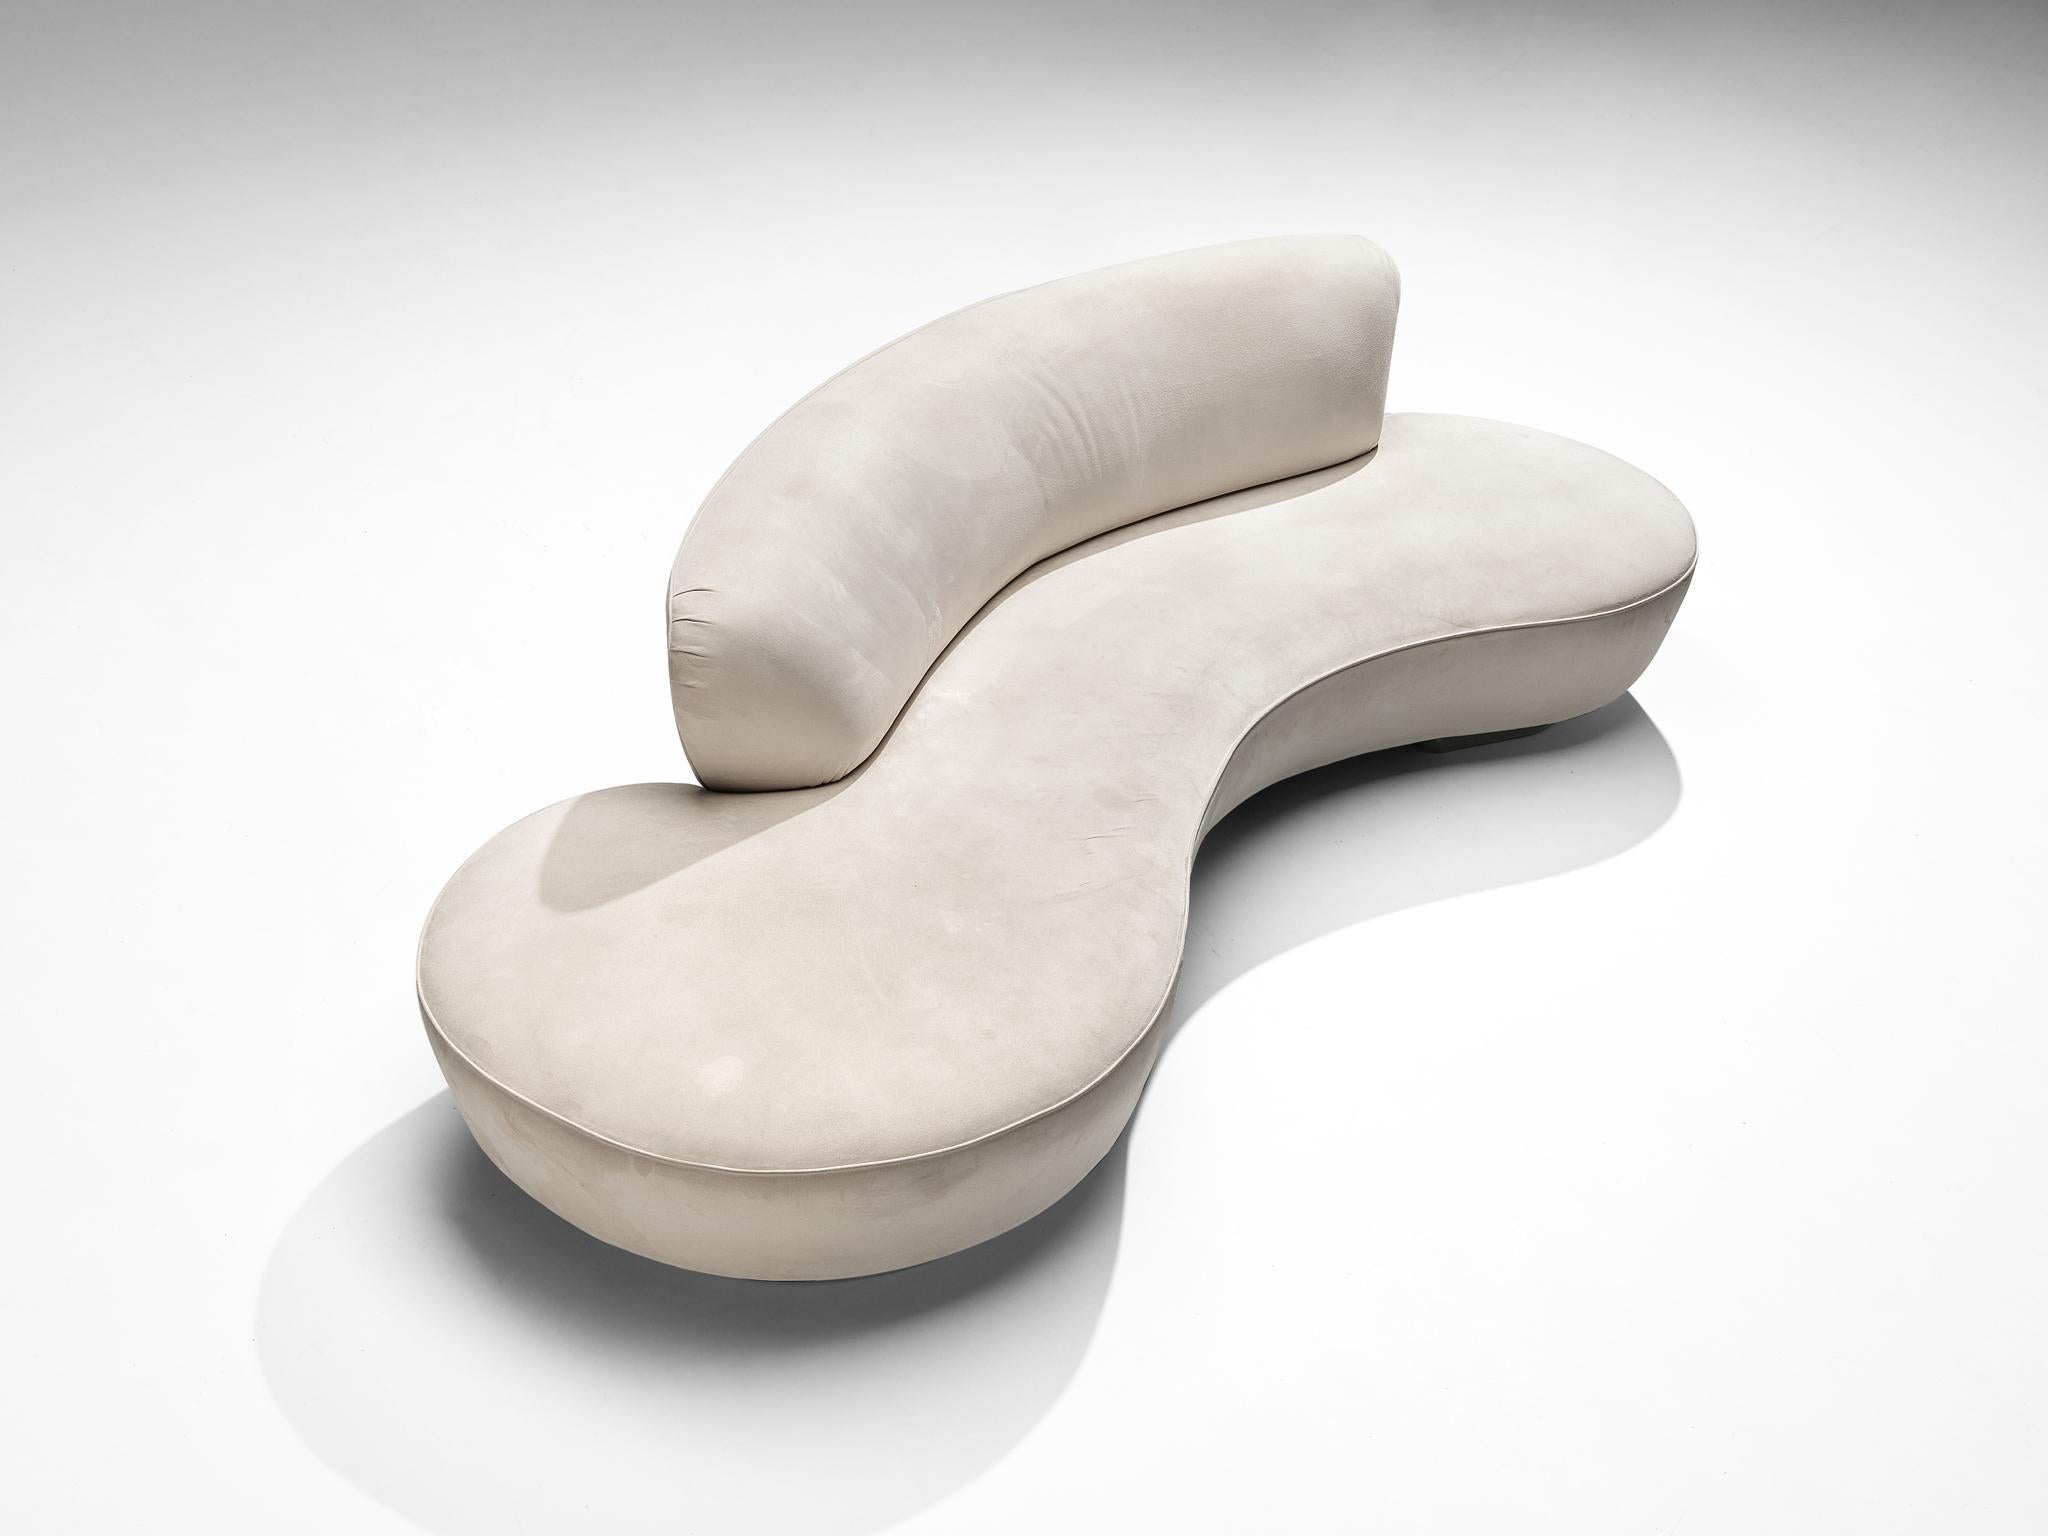 Vladimir Kagan, sofa model ‘Serpentine’ with ottoman, off-white alcantara upholstery, chrome-plated metal, United States, design 1950s.

This sofa is designed by Vladimir Kagan (1927-2016) and clearly expresses his characteristic curvaceous shapes